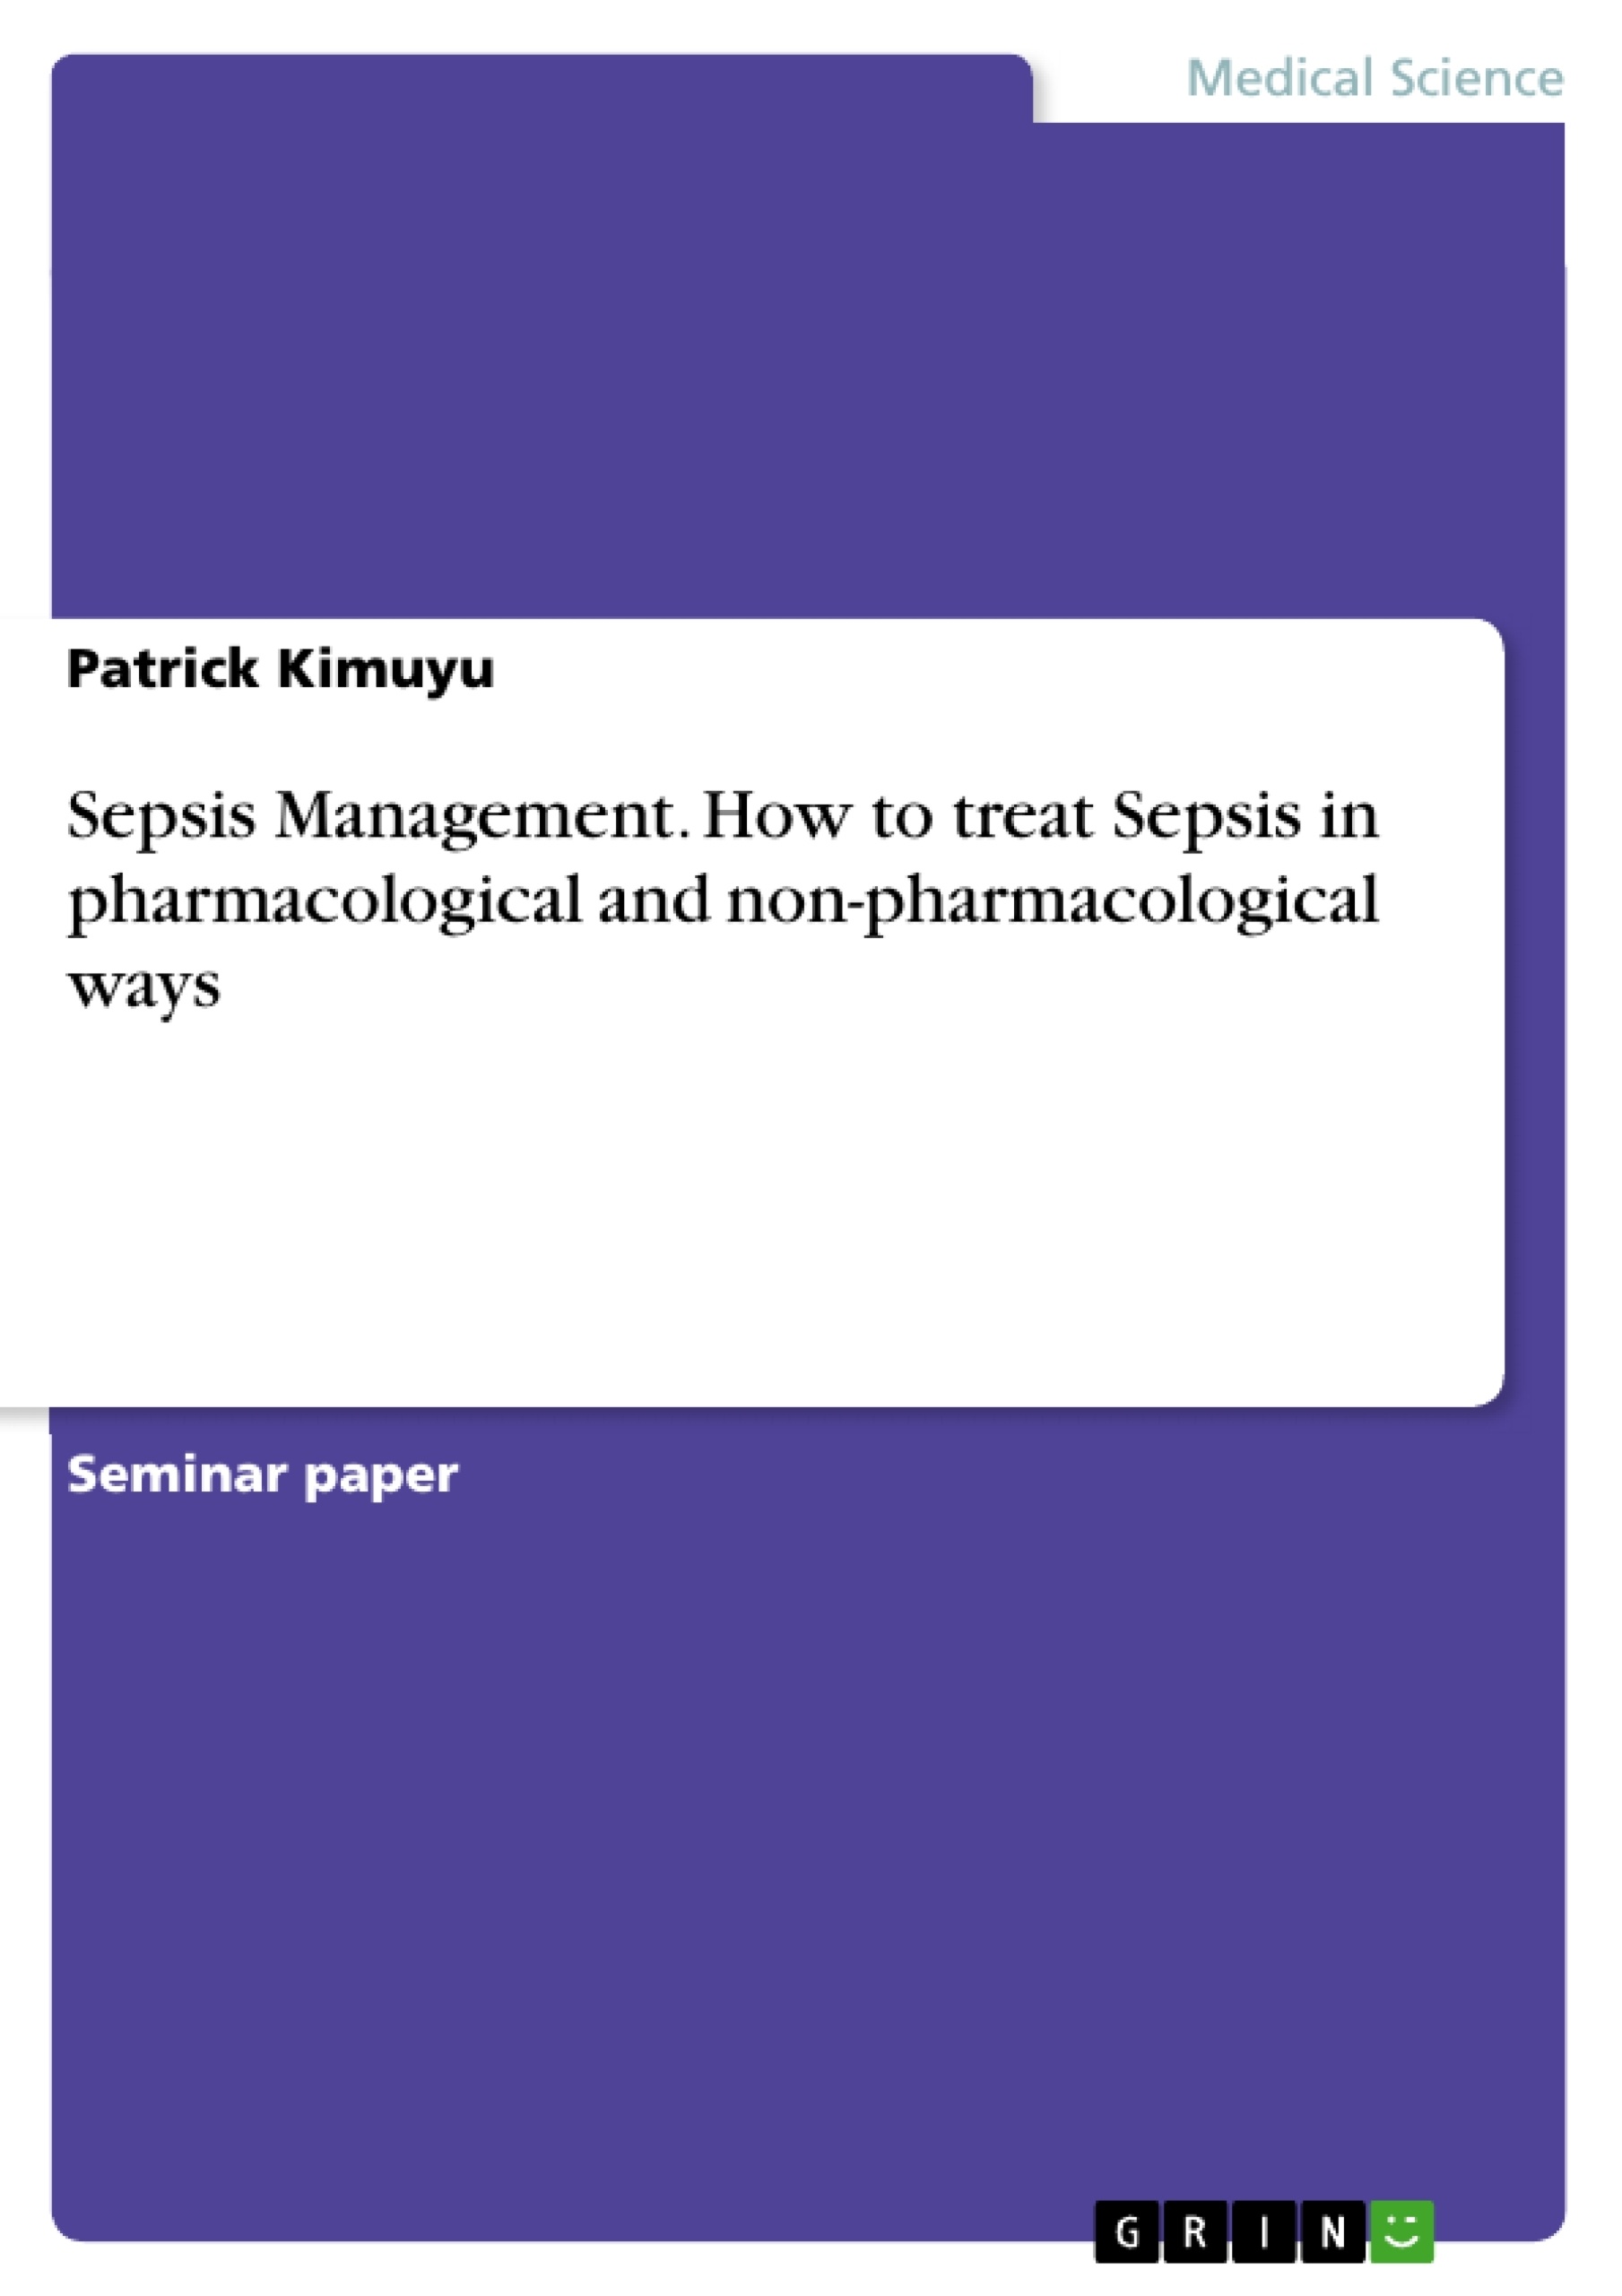 Titre: Sepsis Management. How to treat Sepsis in pharmacological and non-pharmacological ways